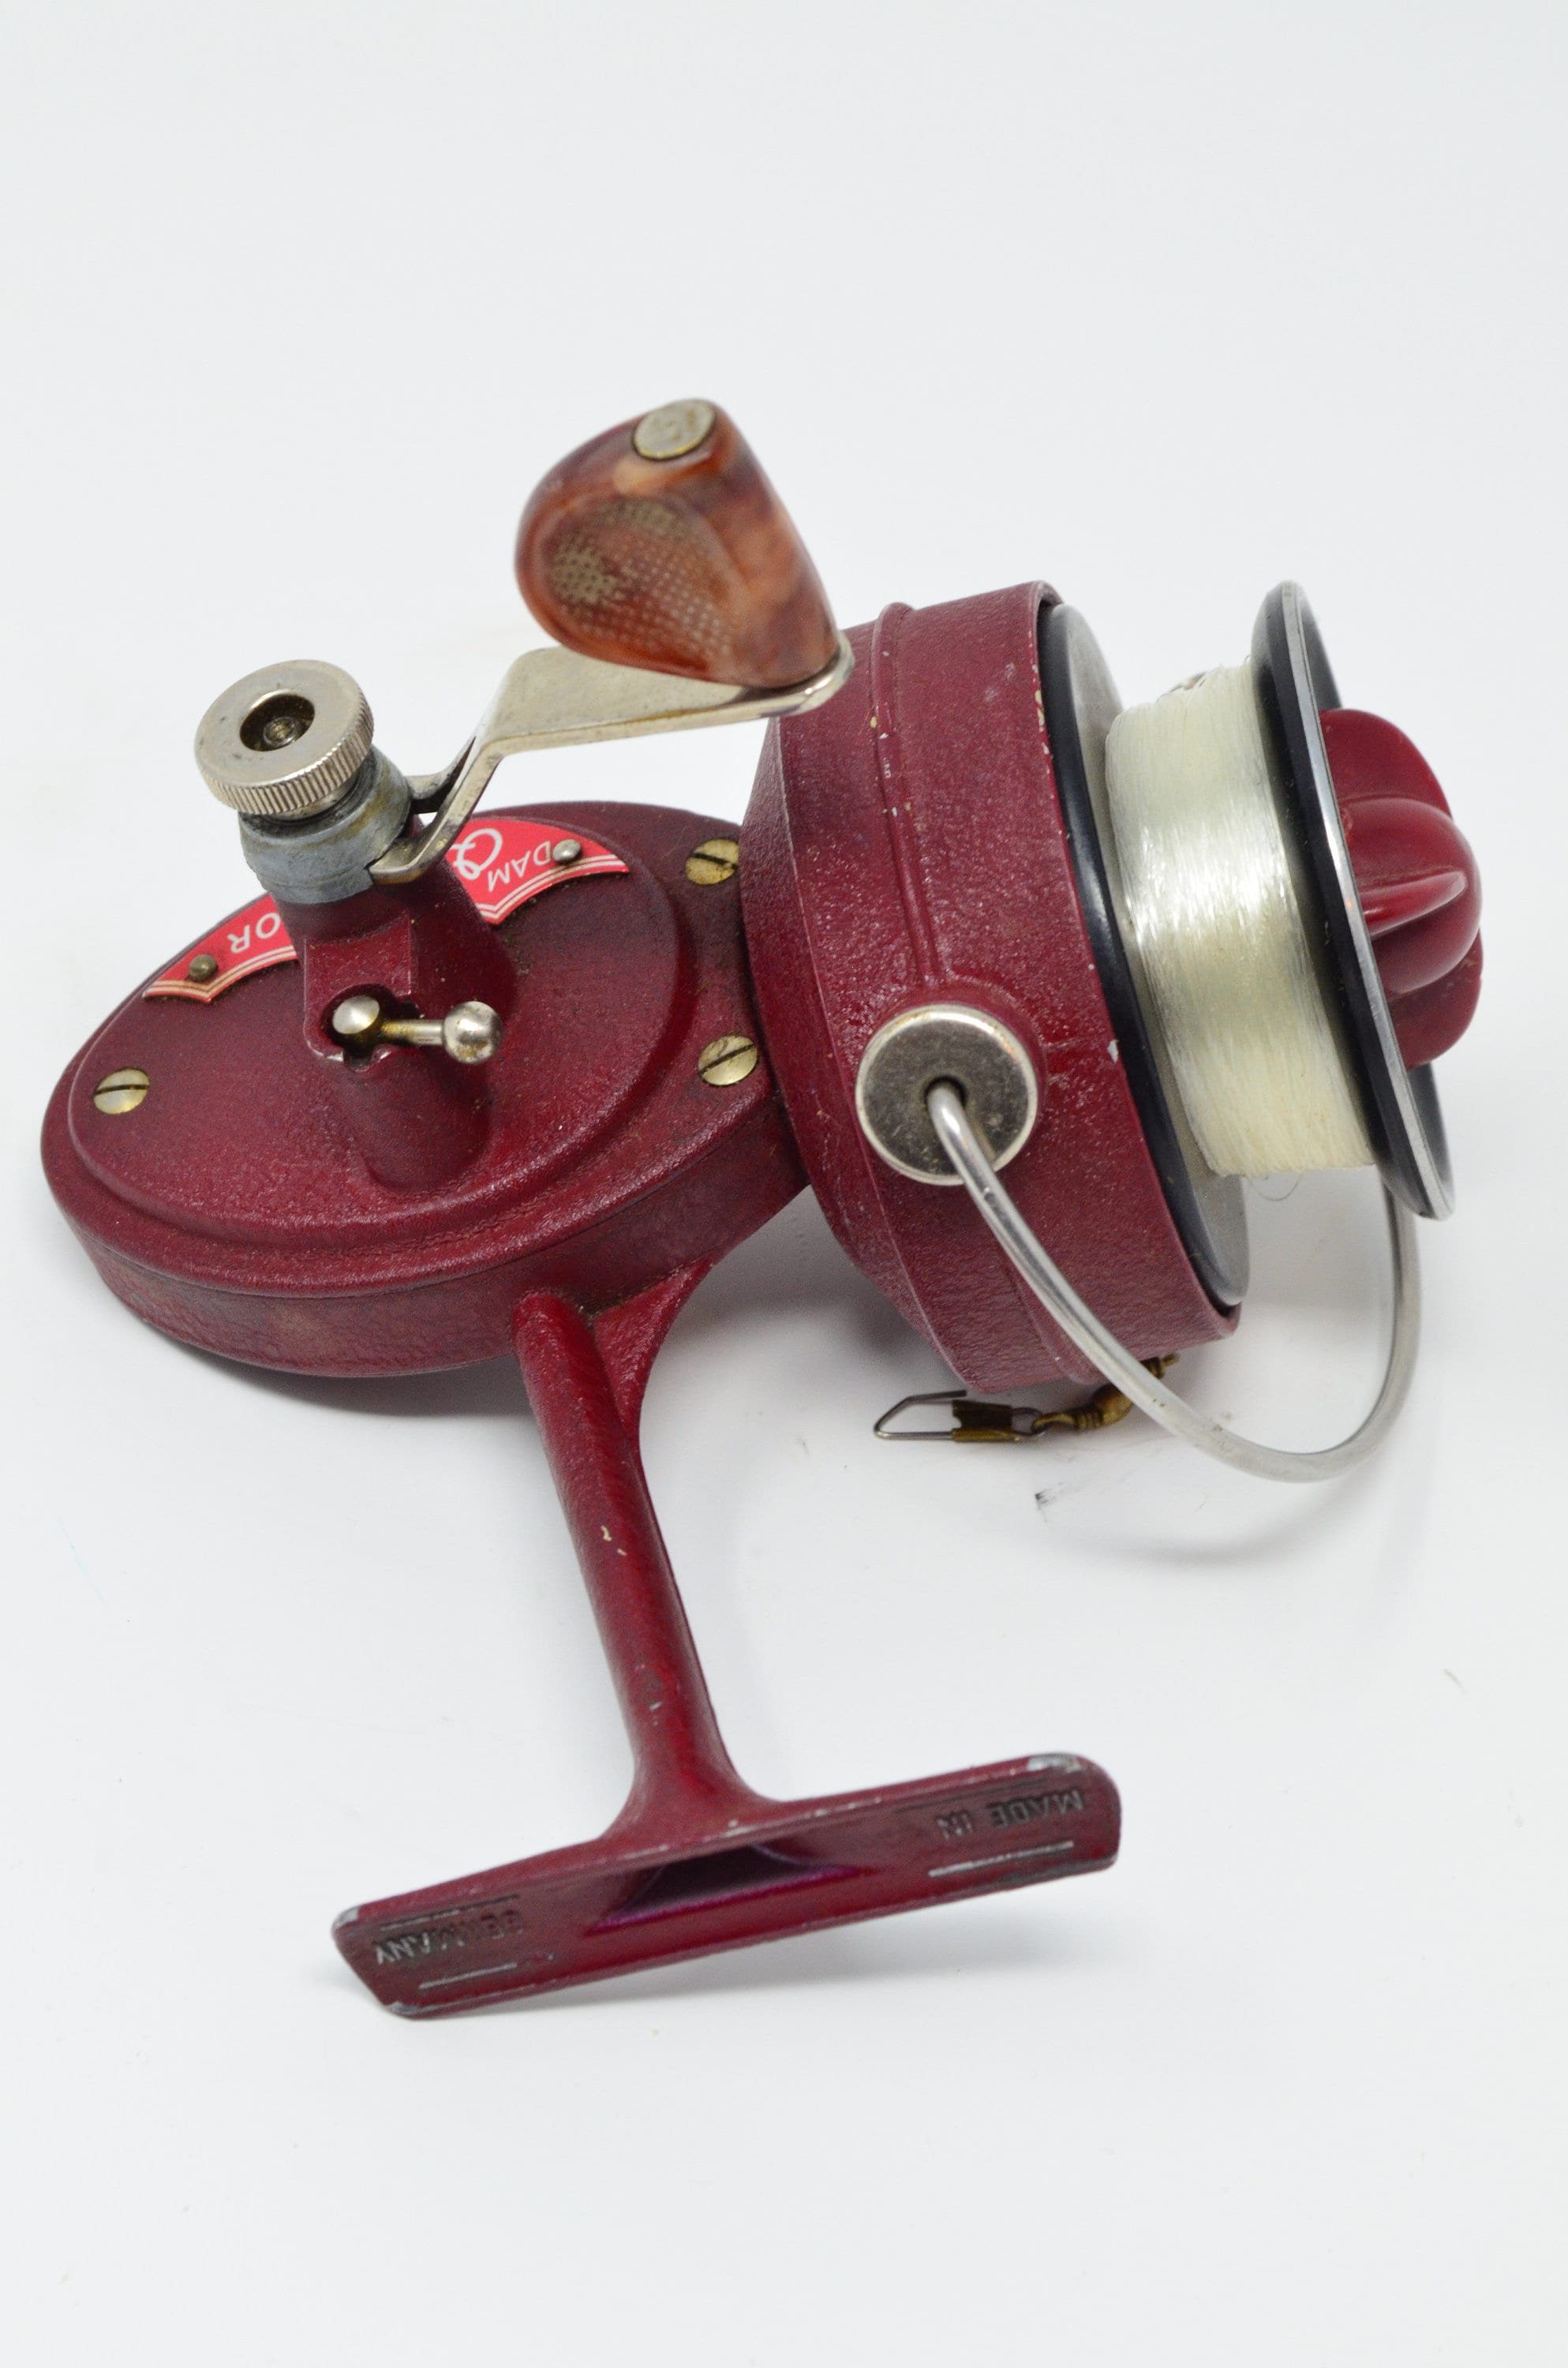 Vintage DAM Quick Junior Spinning Fishing Reel Red Made In Germany D.A.M.  海外 即決